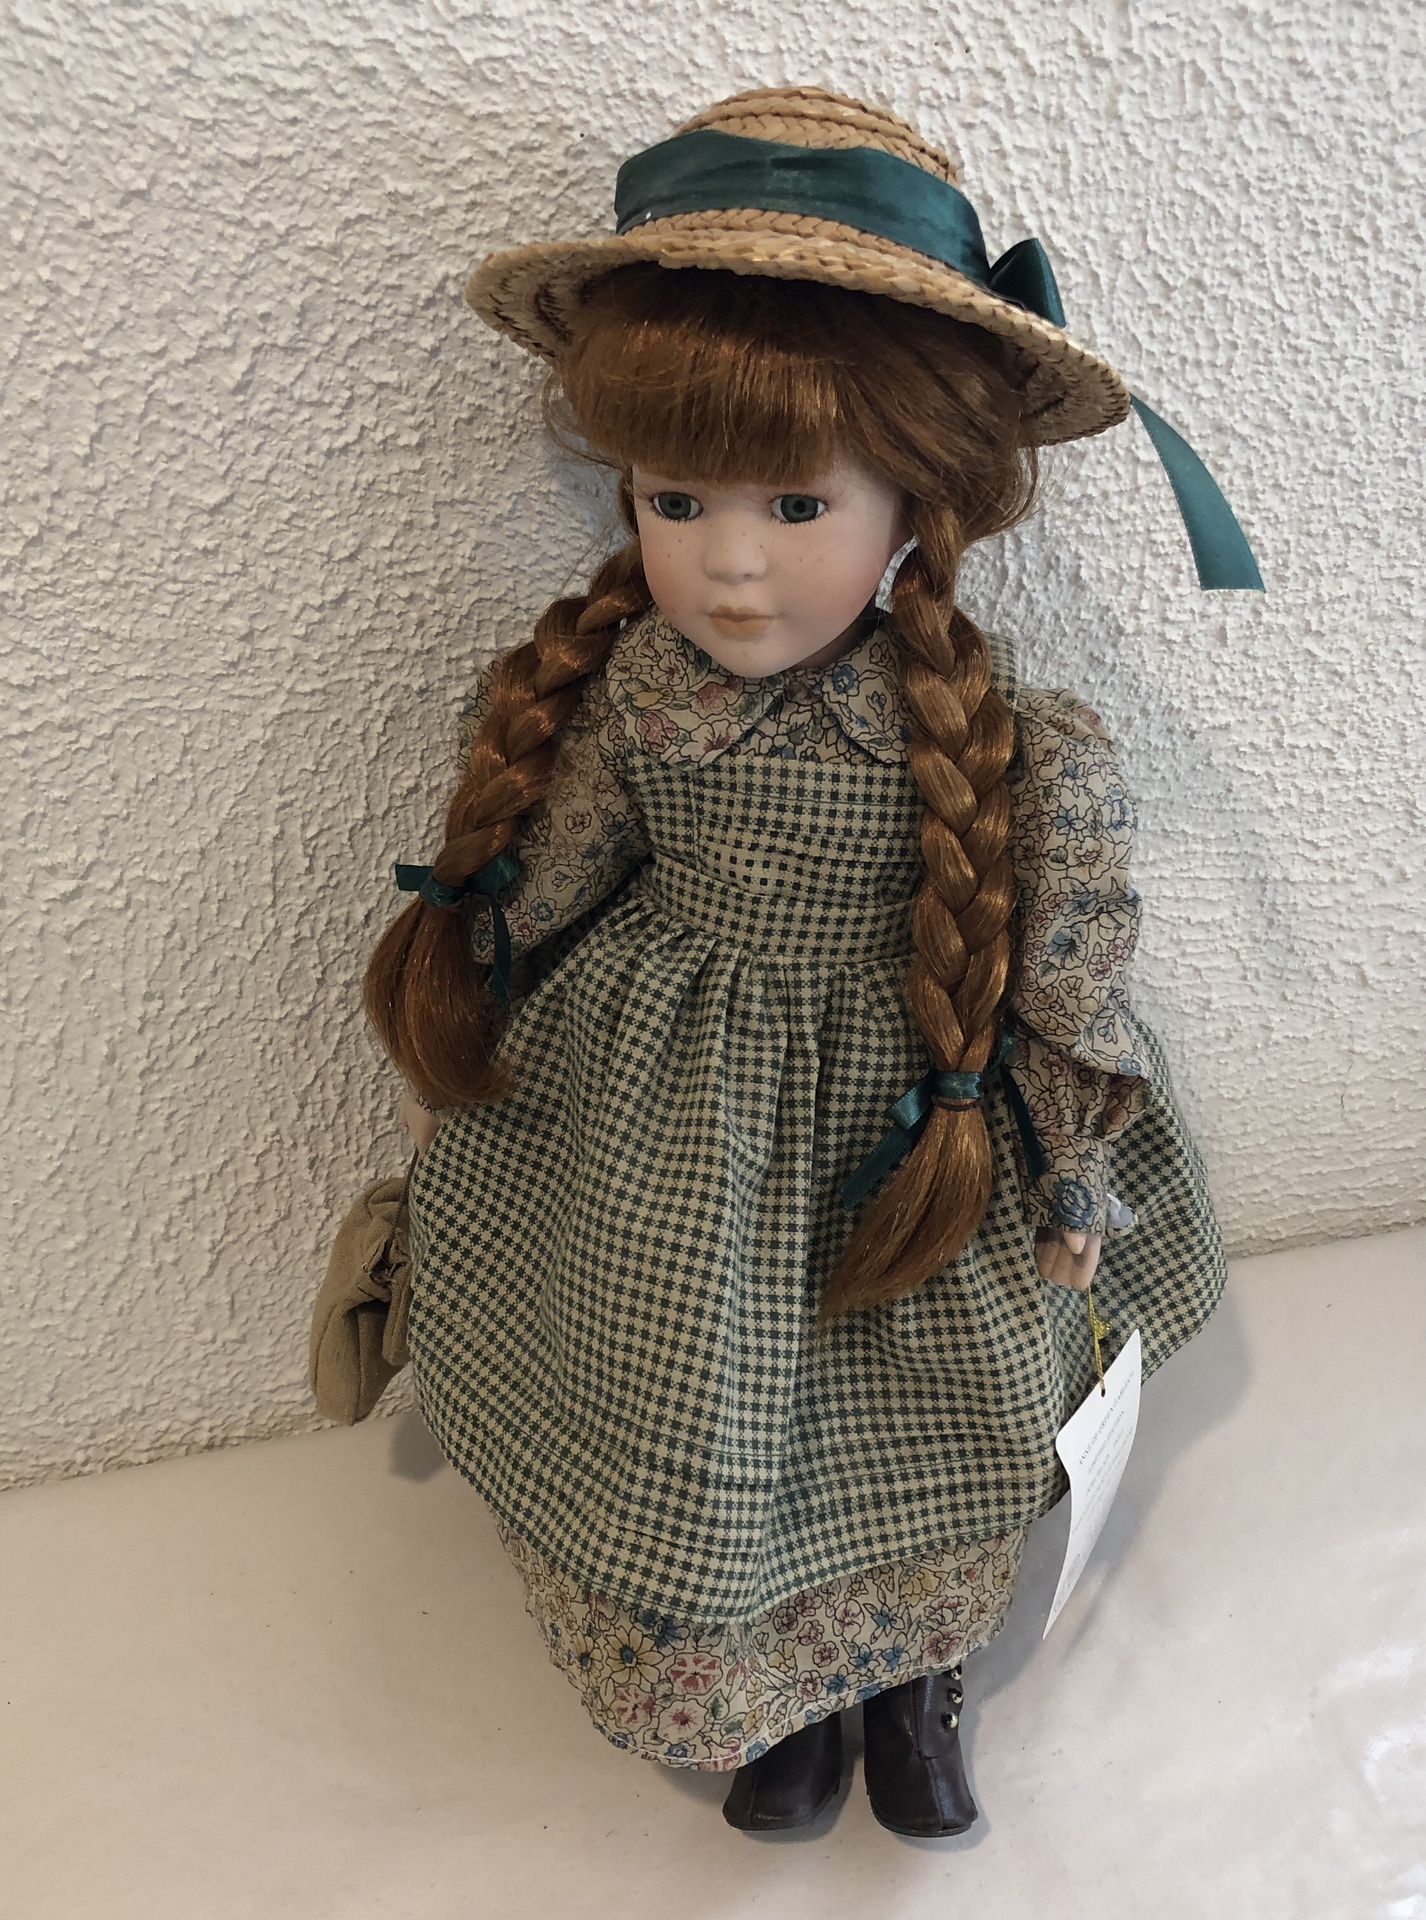 Anne Of Green Gables Limited Edition Porcelain Doll Kindred Spirits Collection 16” Tall Comes With Wooden Stand